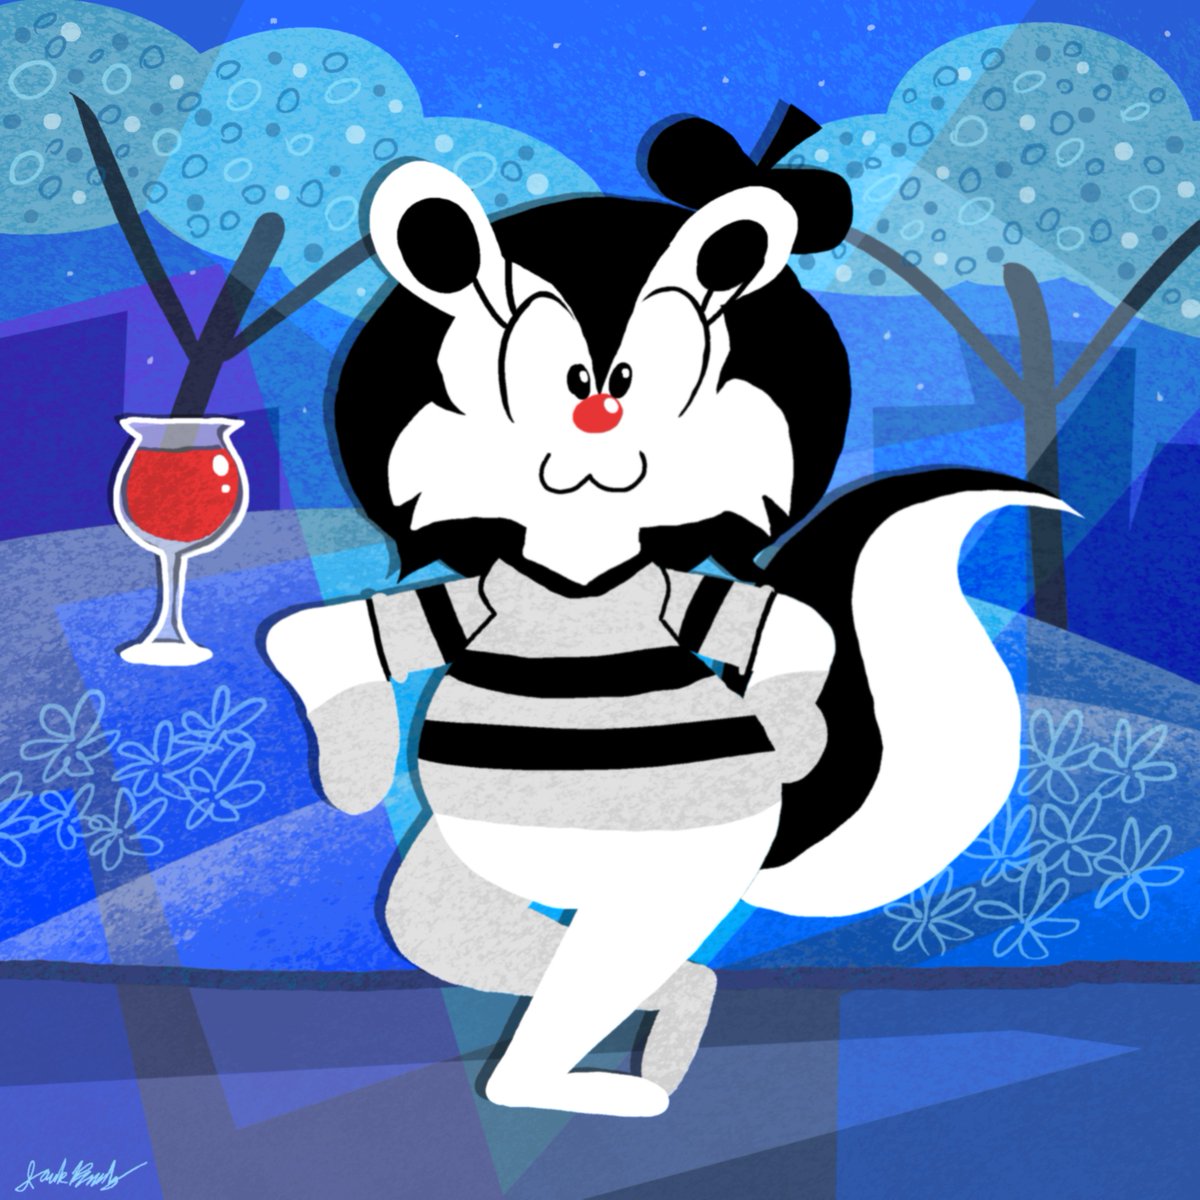 It's Mime Time with Muffle! Skunk art trade with @TheBlendee #skunk #cartoon #mime #french #arttrade